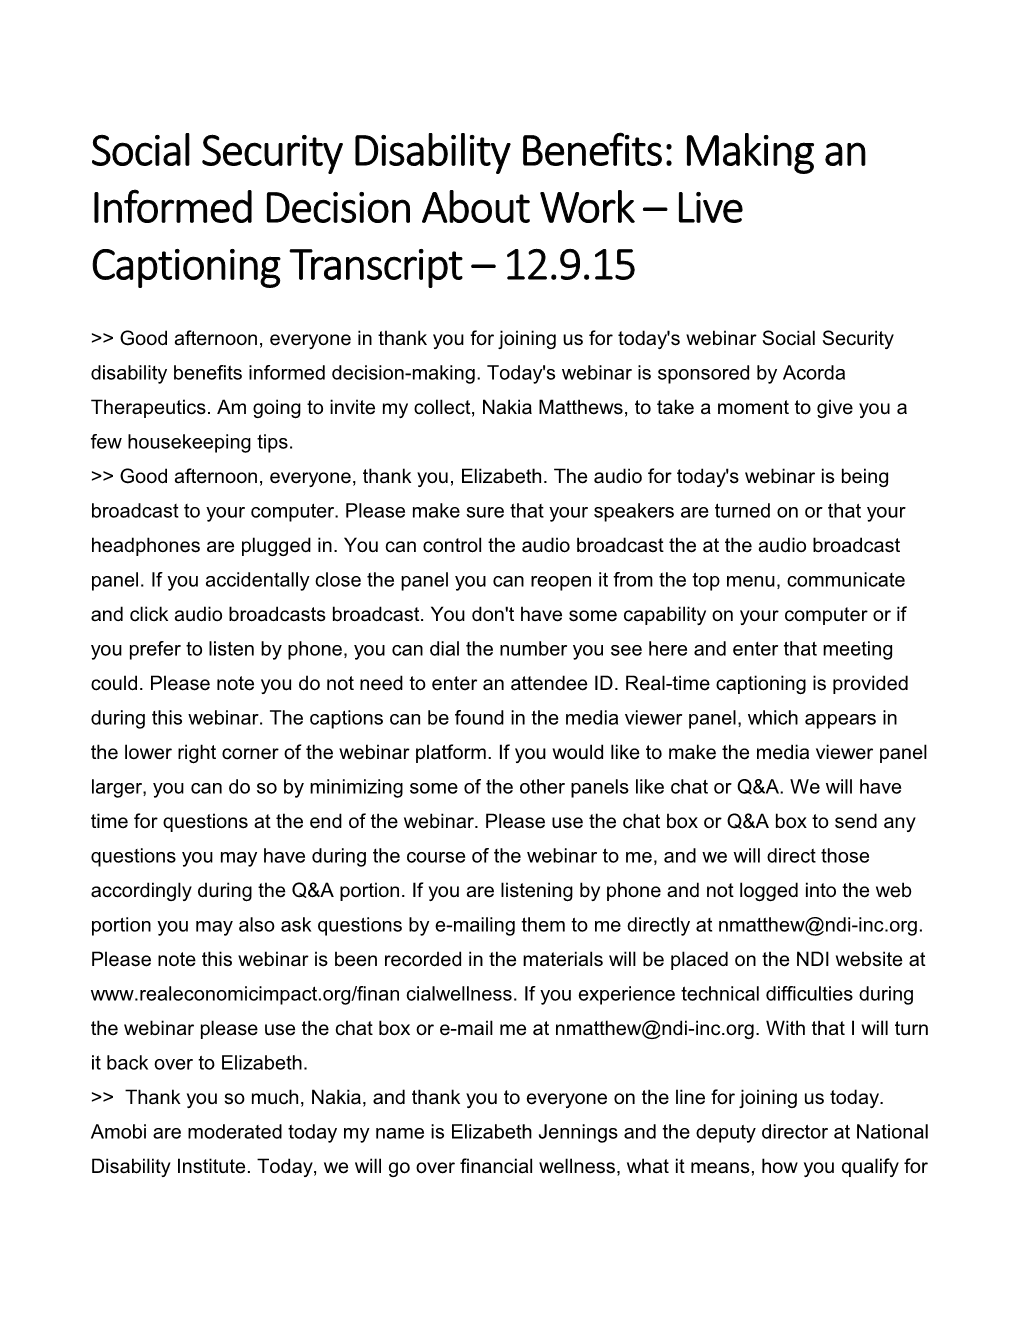 Social Security Disability Benefits: Making an Informed Decision About Work Live Captioning